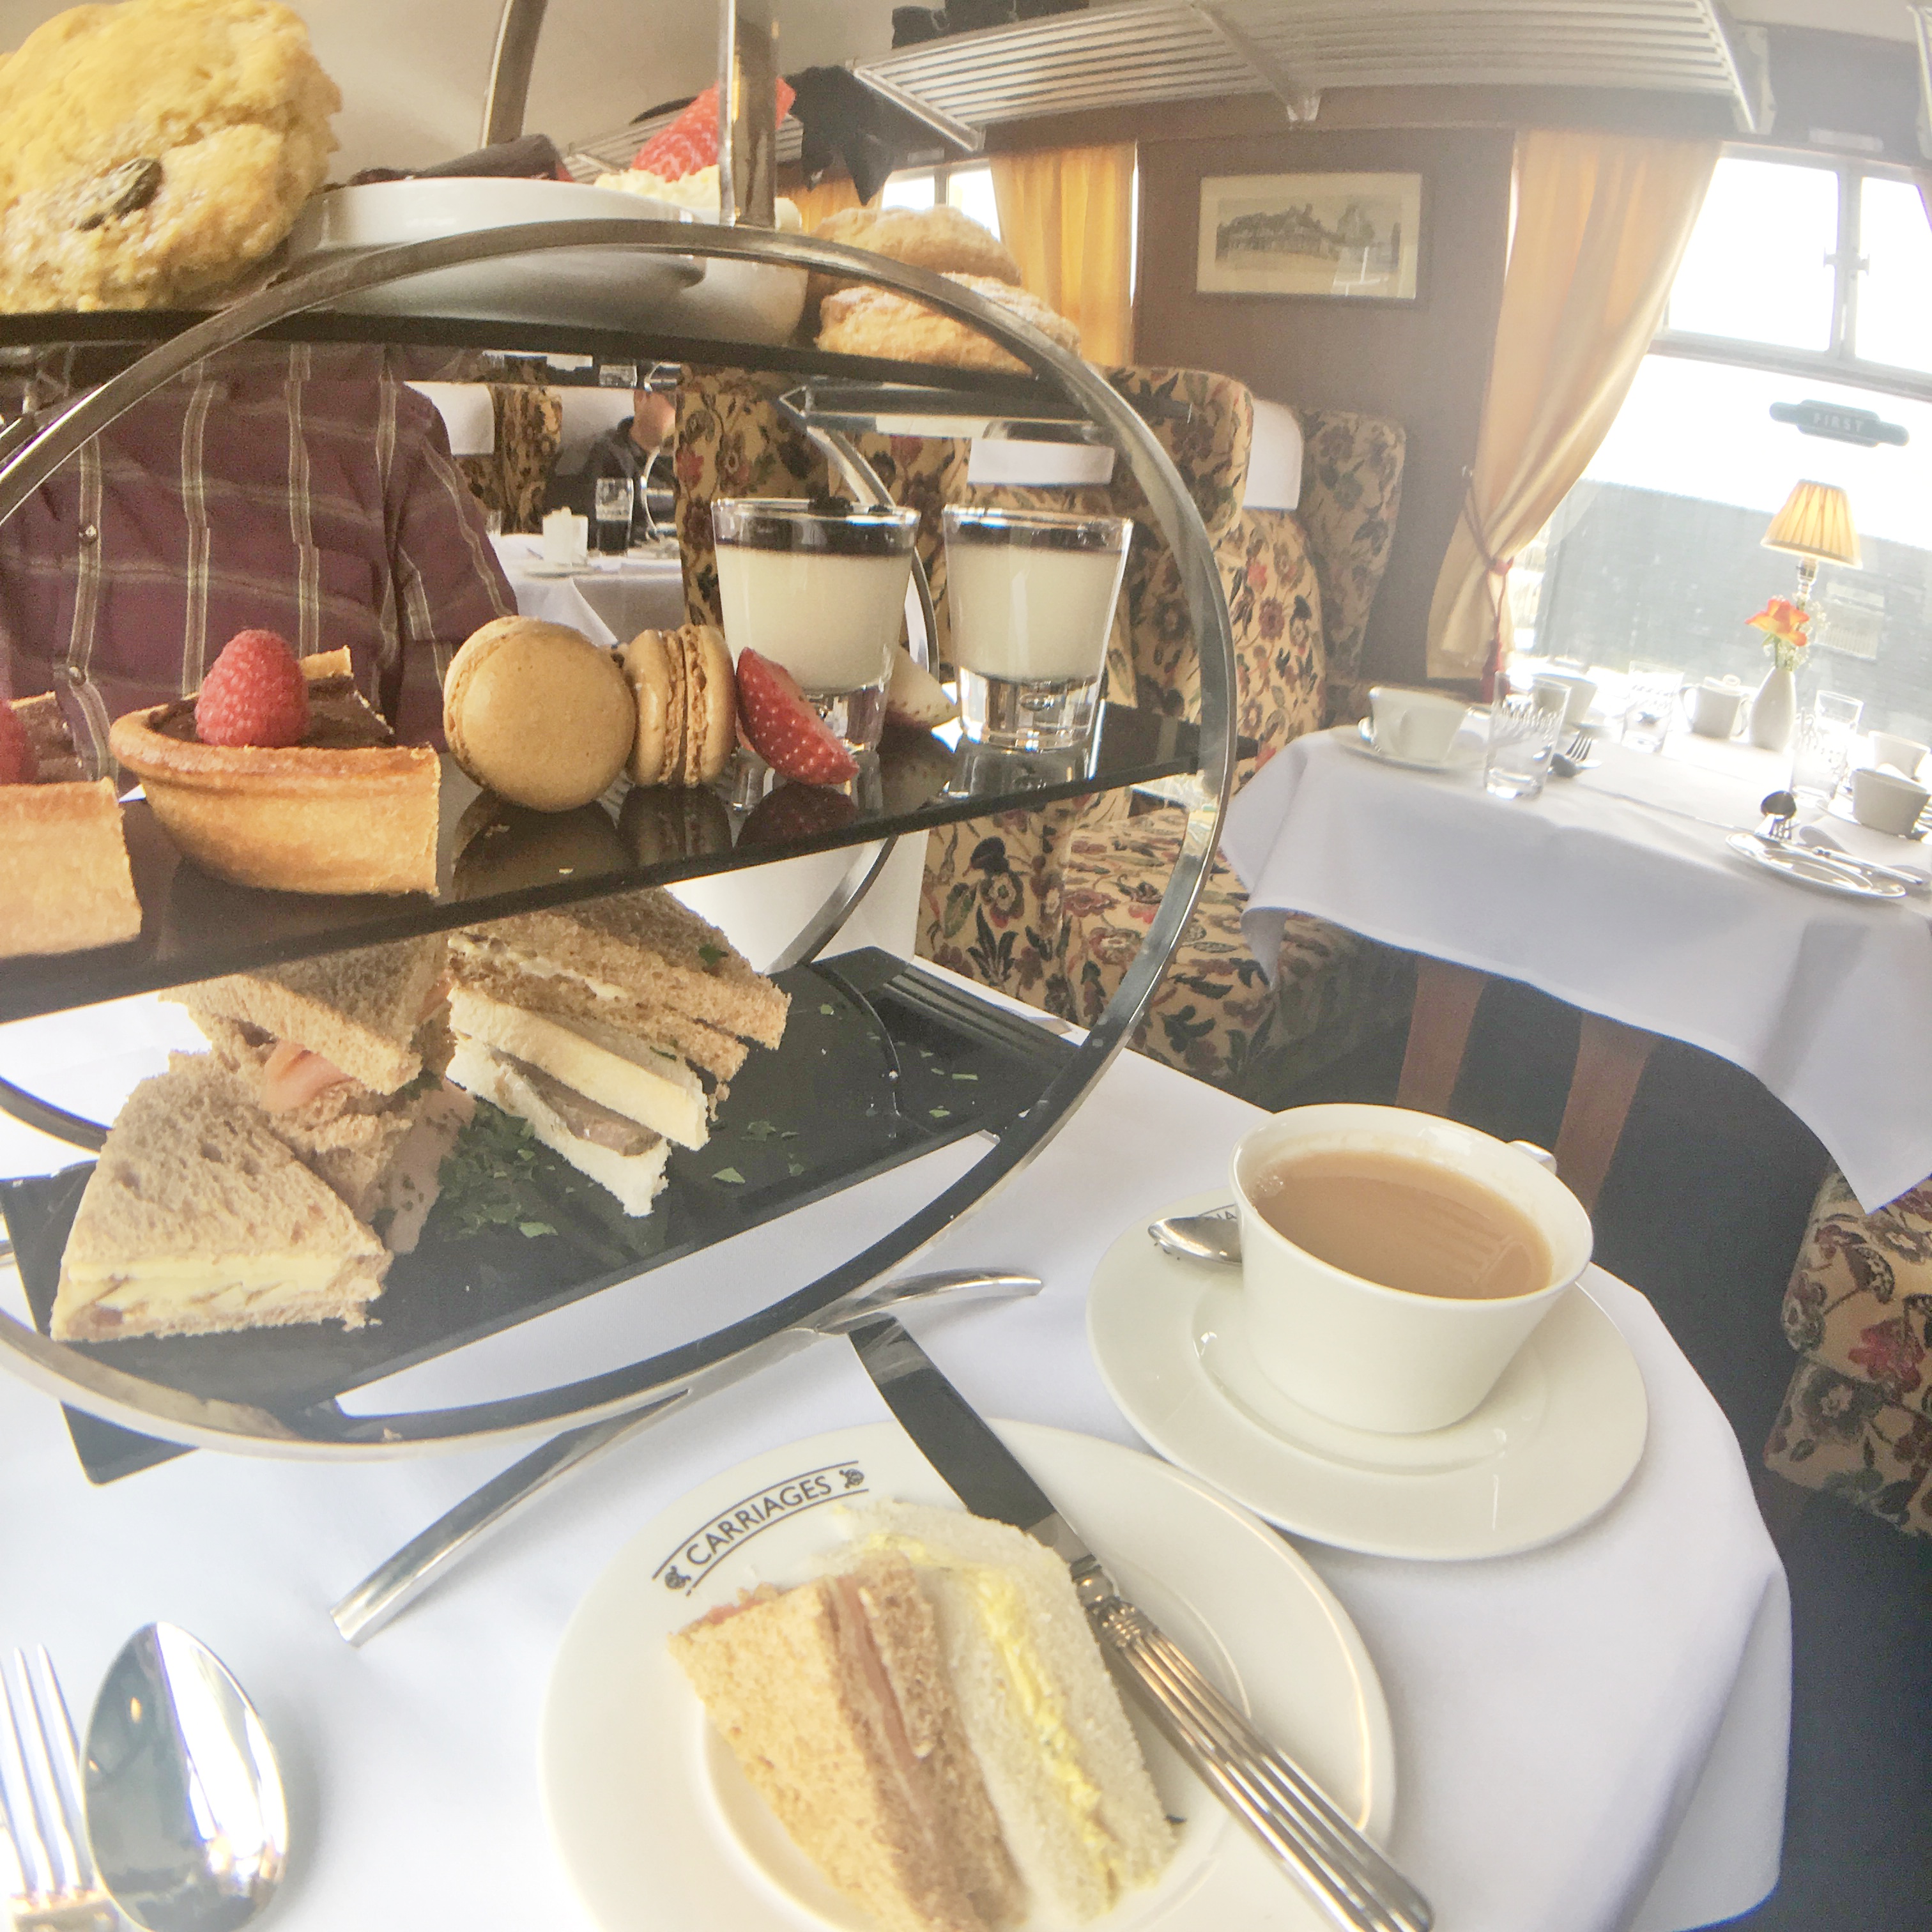 Review: Afternoon Tea At Carriages Of Cambridge